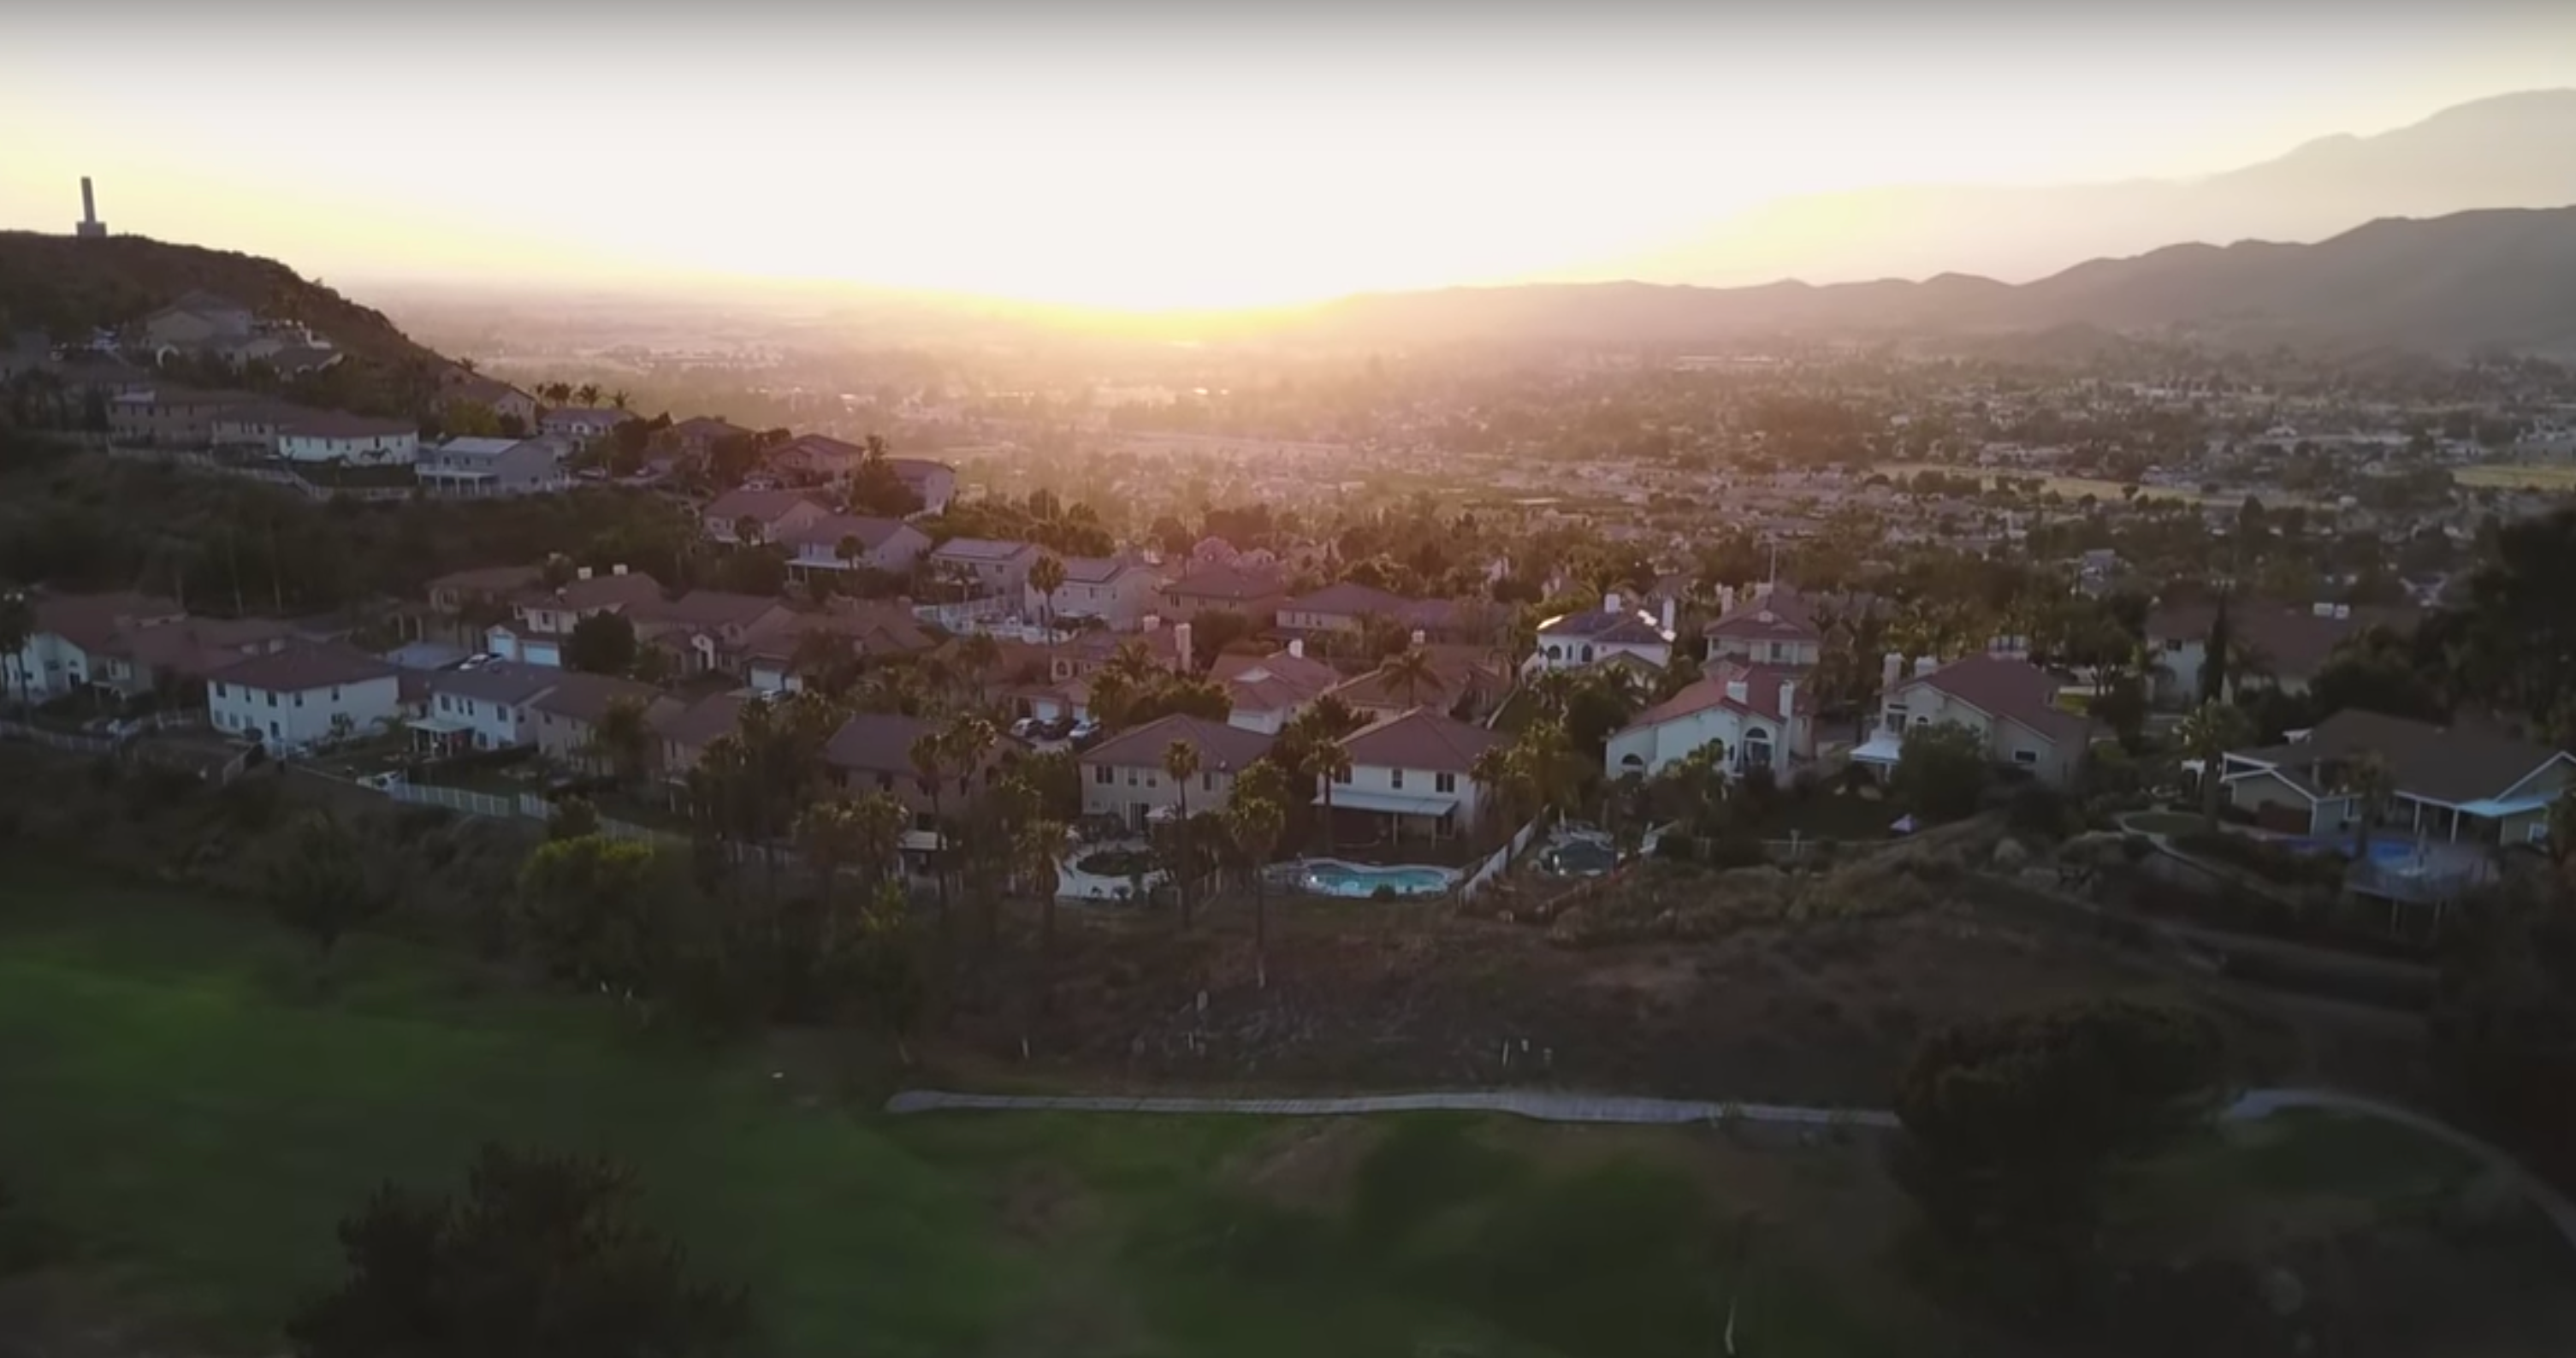 The Effects These 5 Essential Drone Shots Have on Your Audience